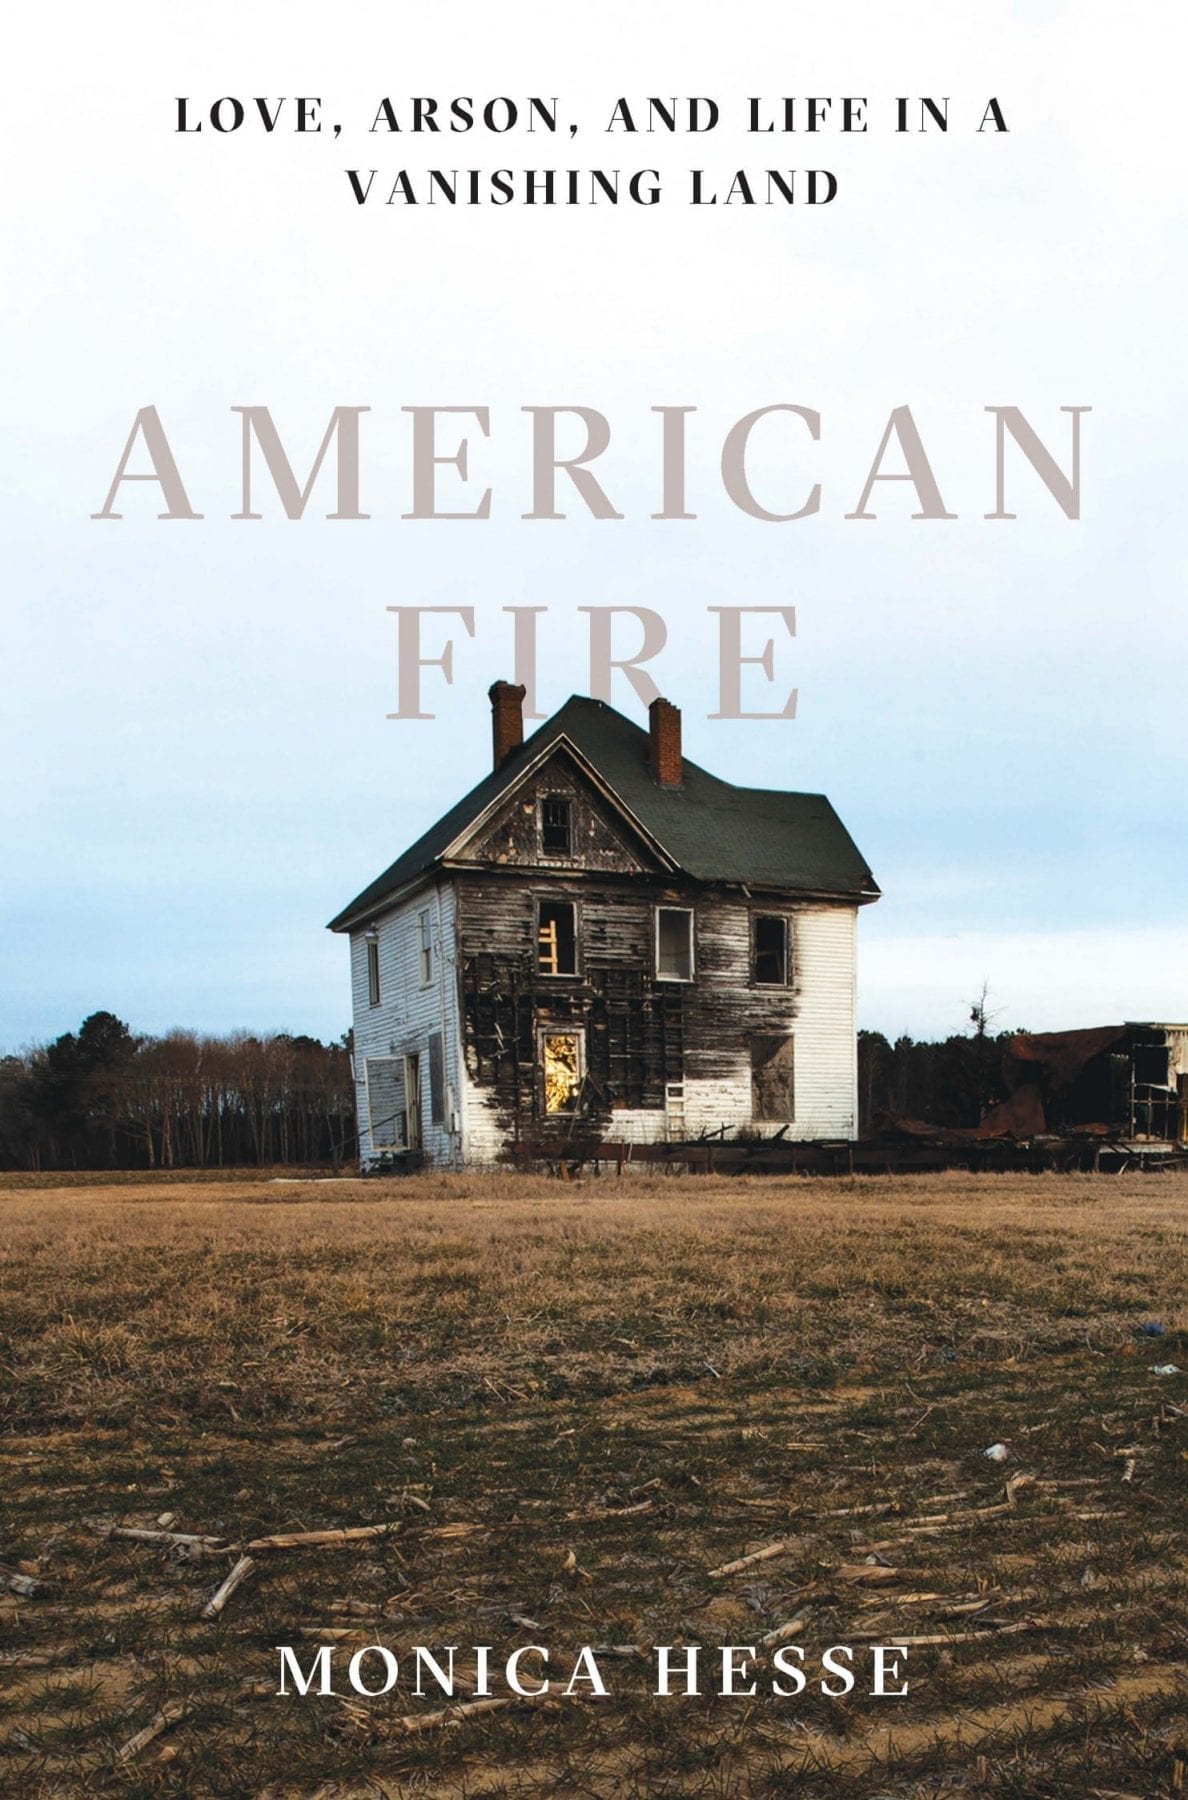 American Fire- Love, Arson and Life in a Vanishing Land by Monica Hesse